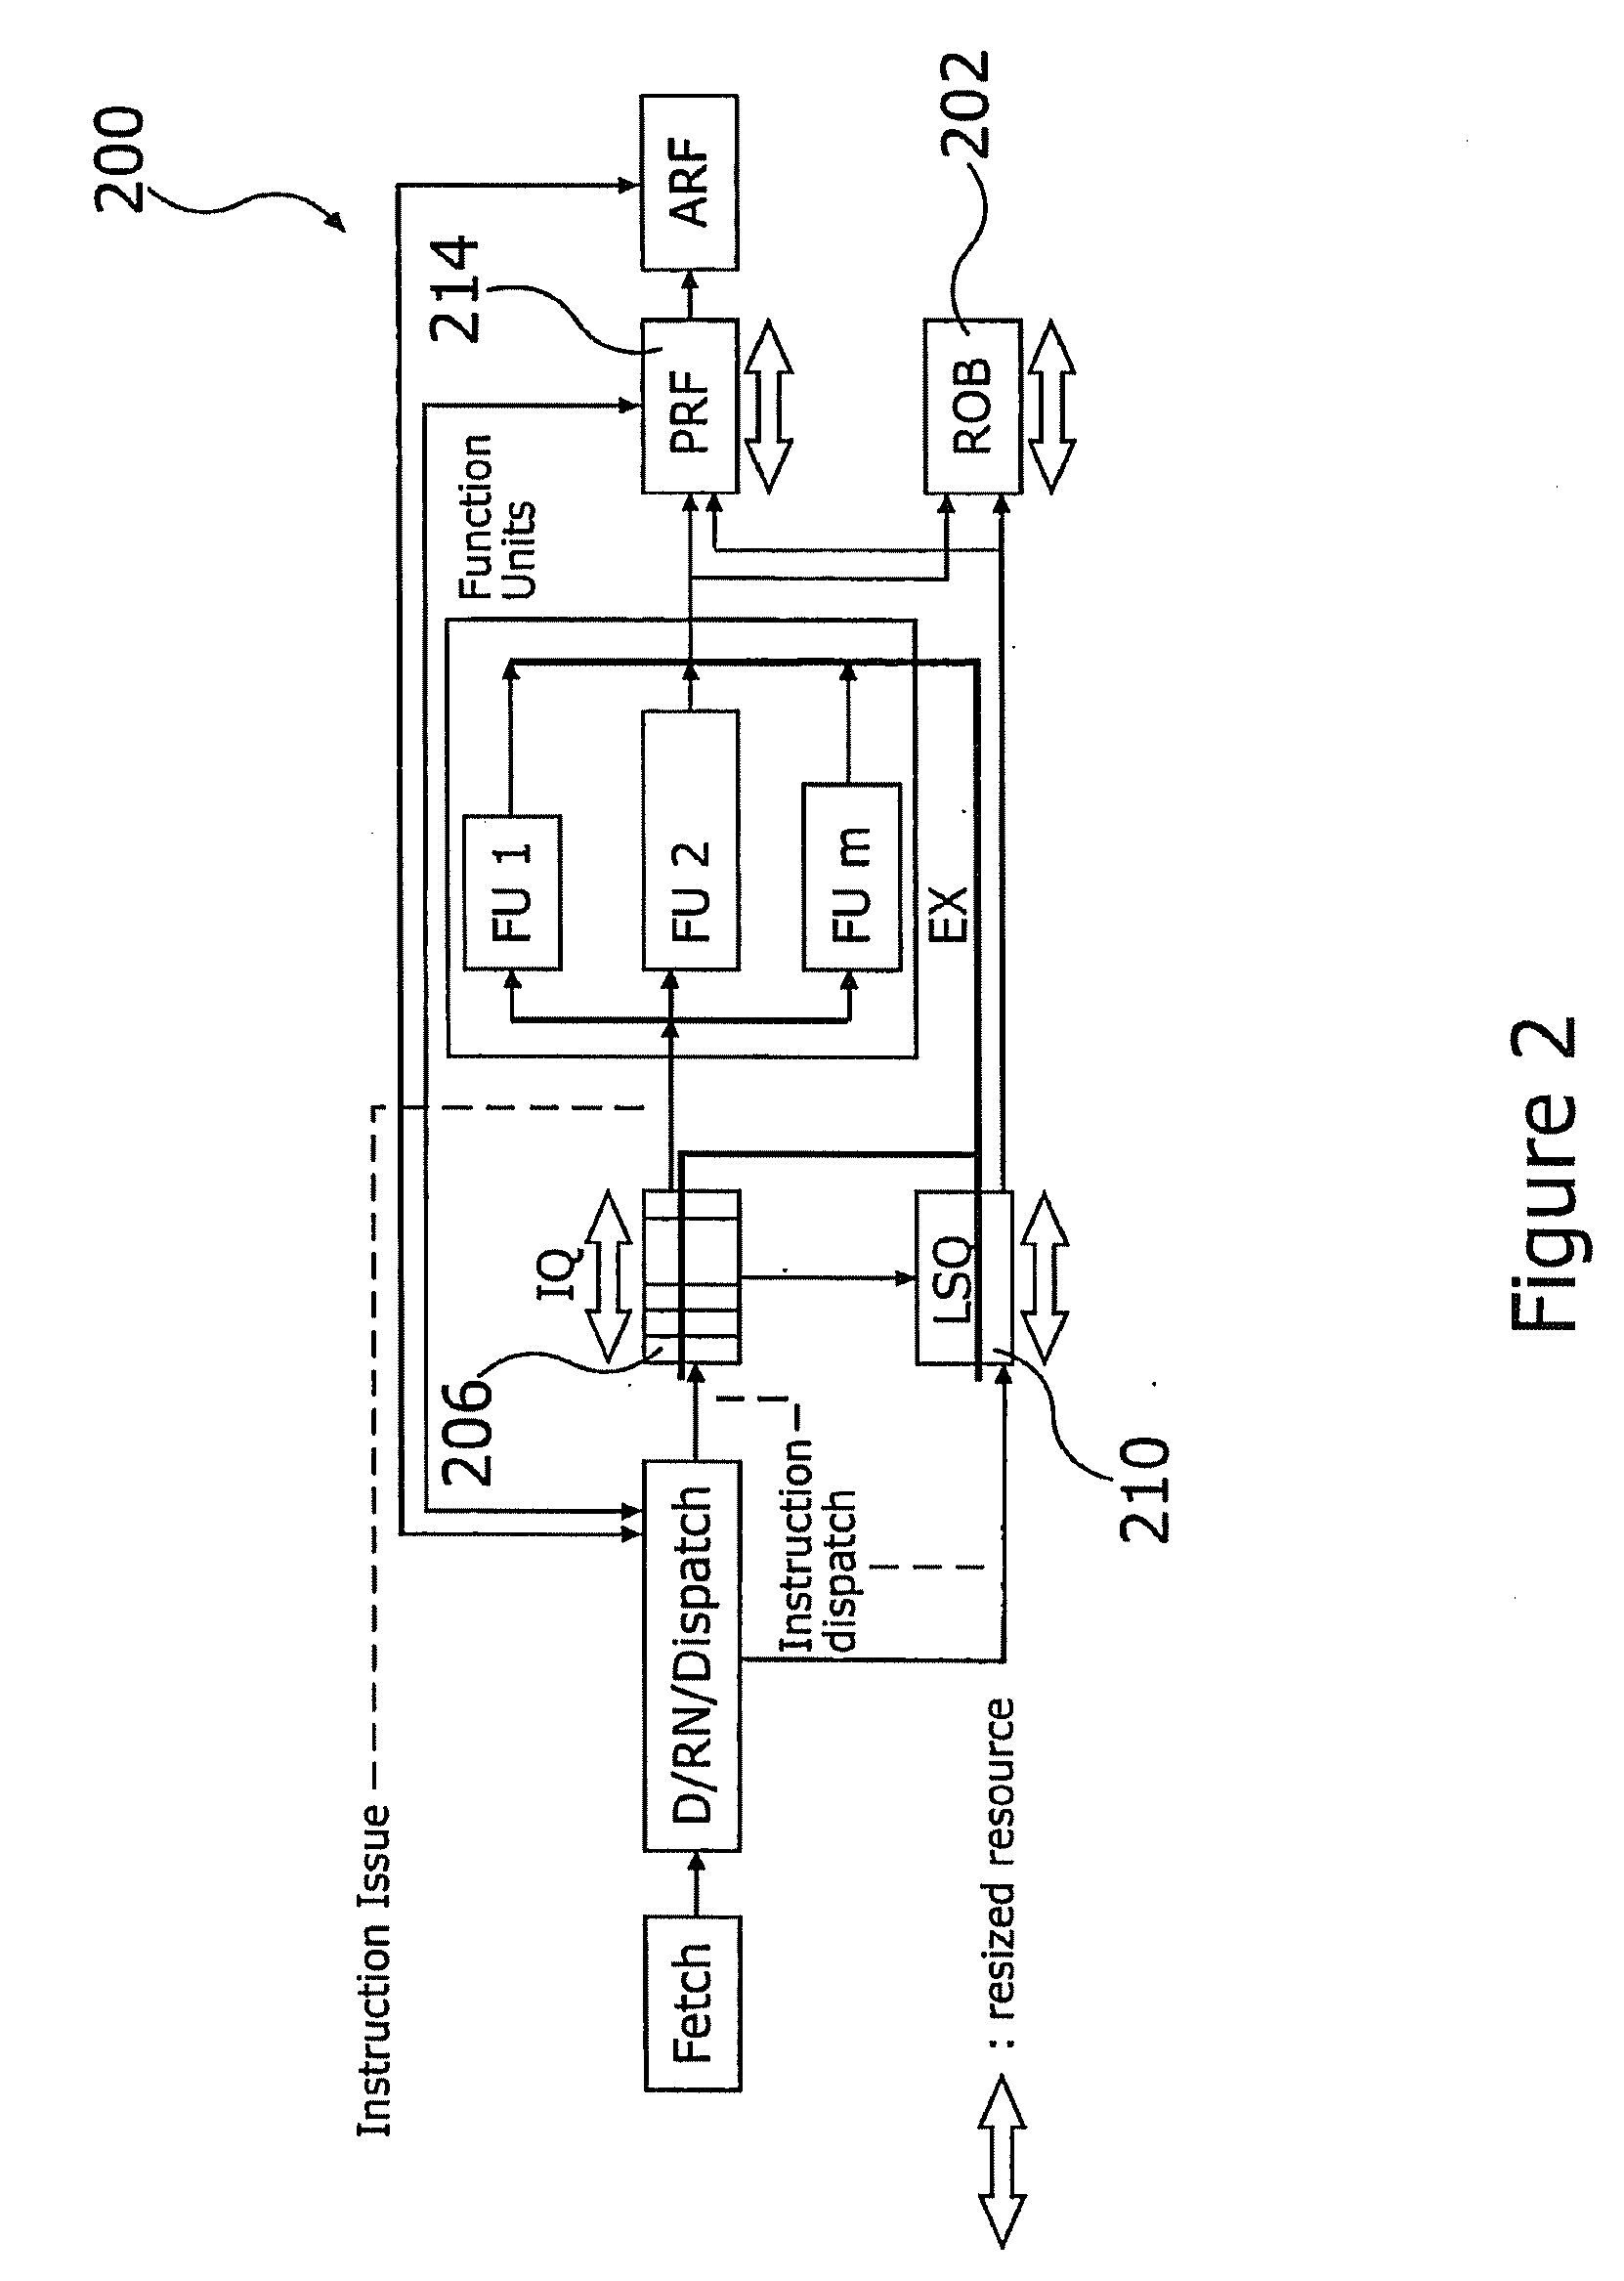 System and Method for Reducing Power Requirements of Microprocessors Through Dynamic Allocation of Datapath Resources